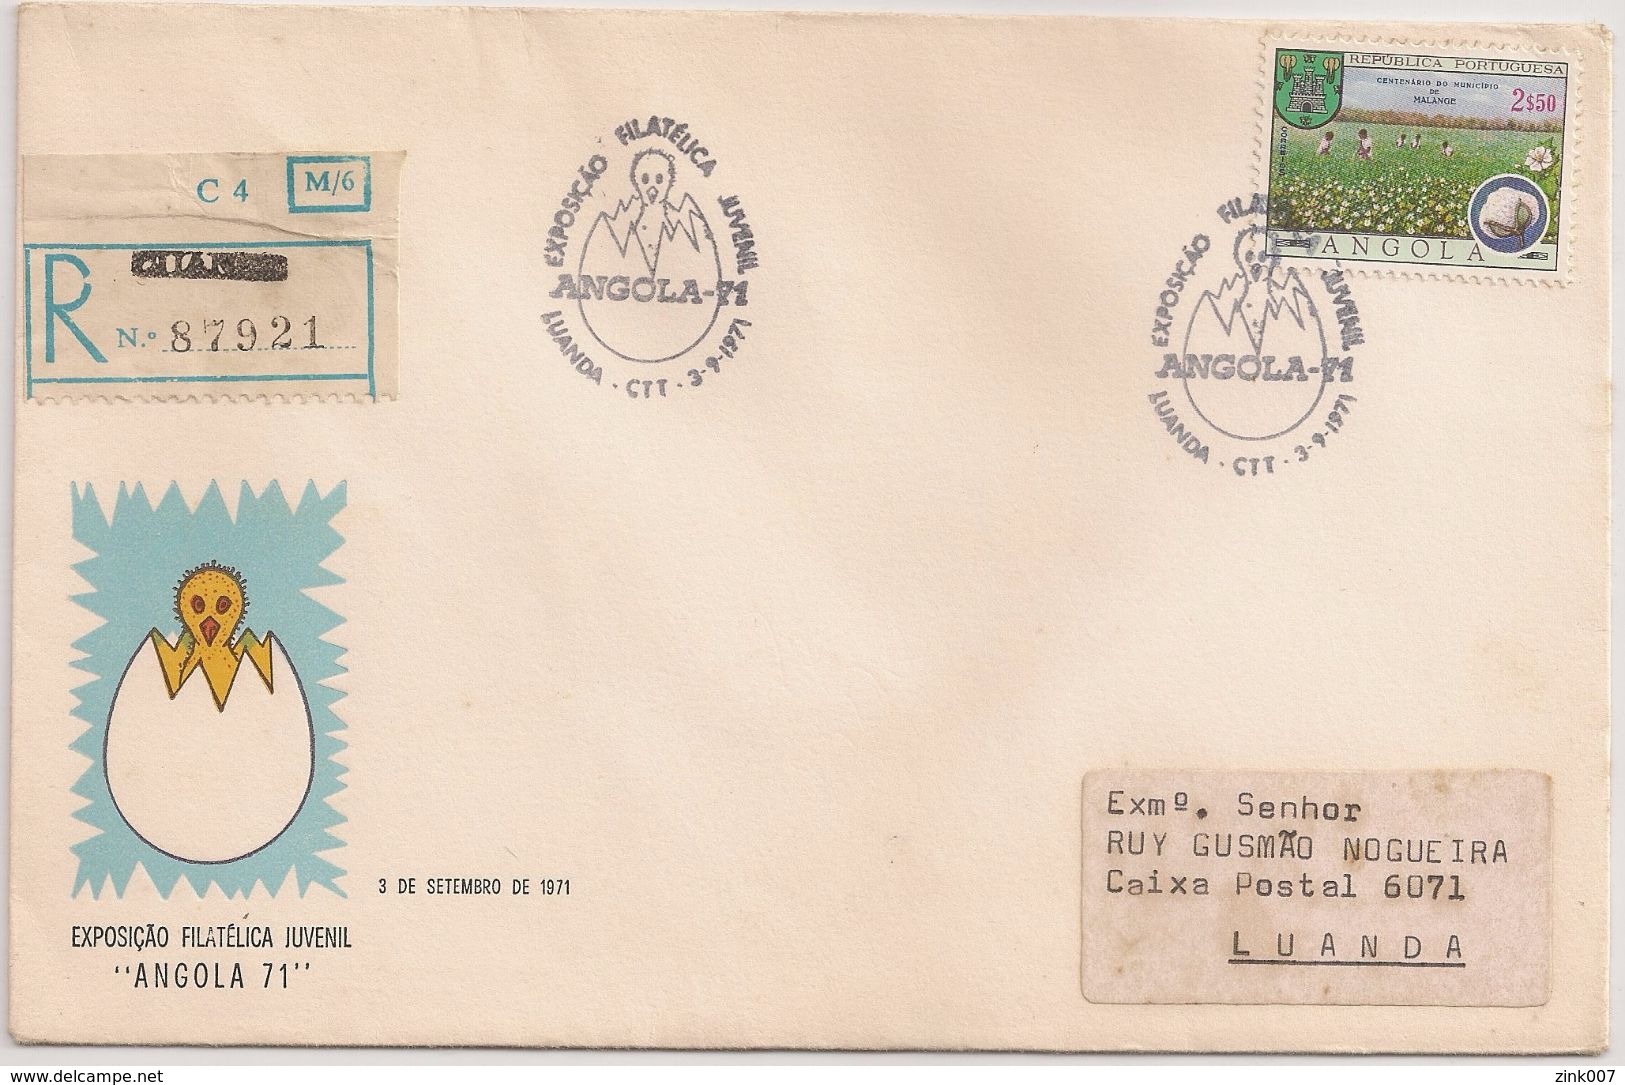 Angola Registered Cover Circulated To Luanda - 1971 - Stamp County Malange - Philatelic Youth Exhibition - Angola